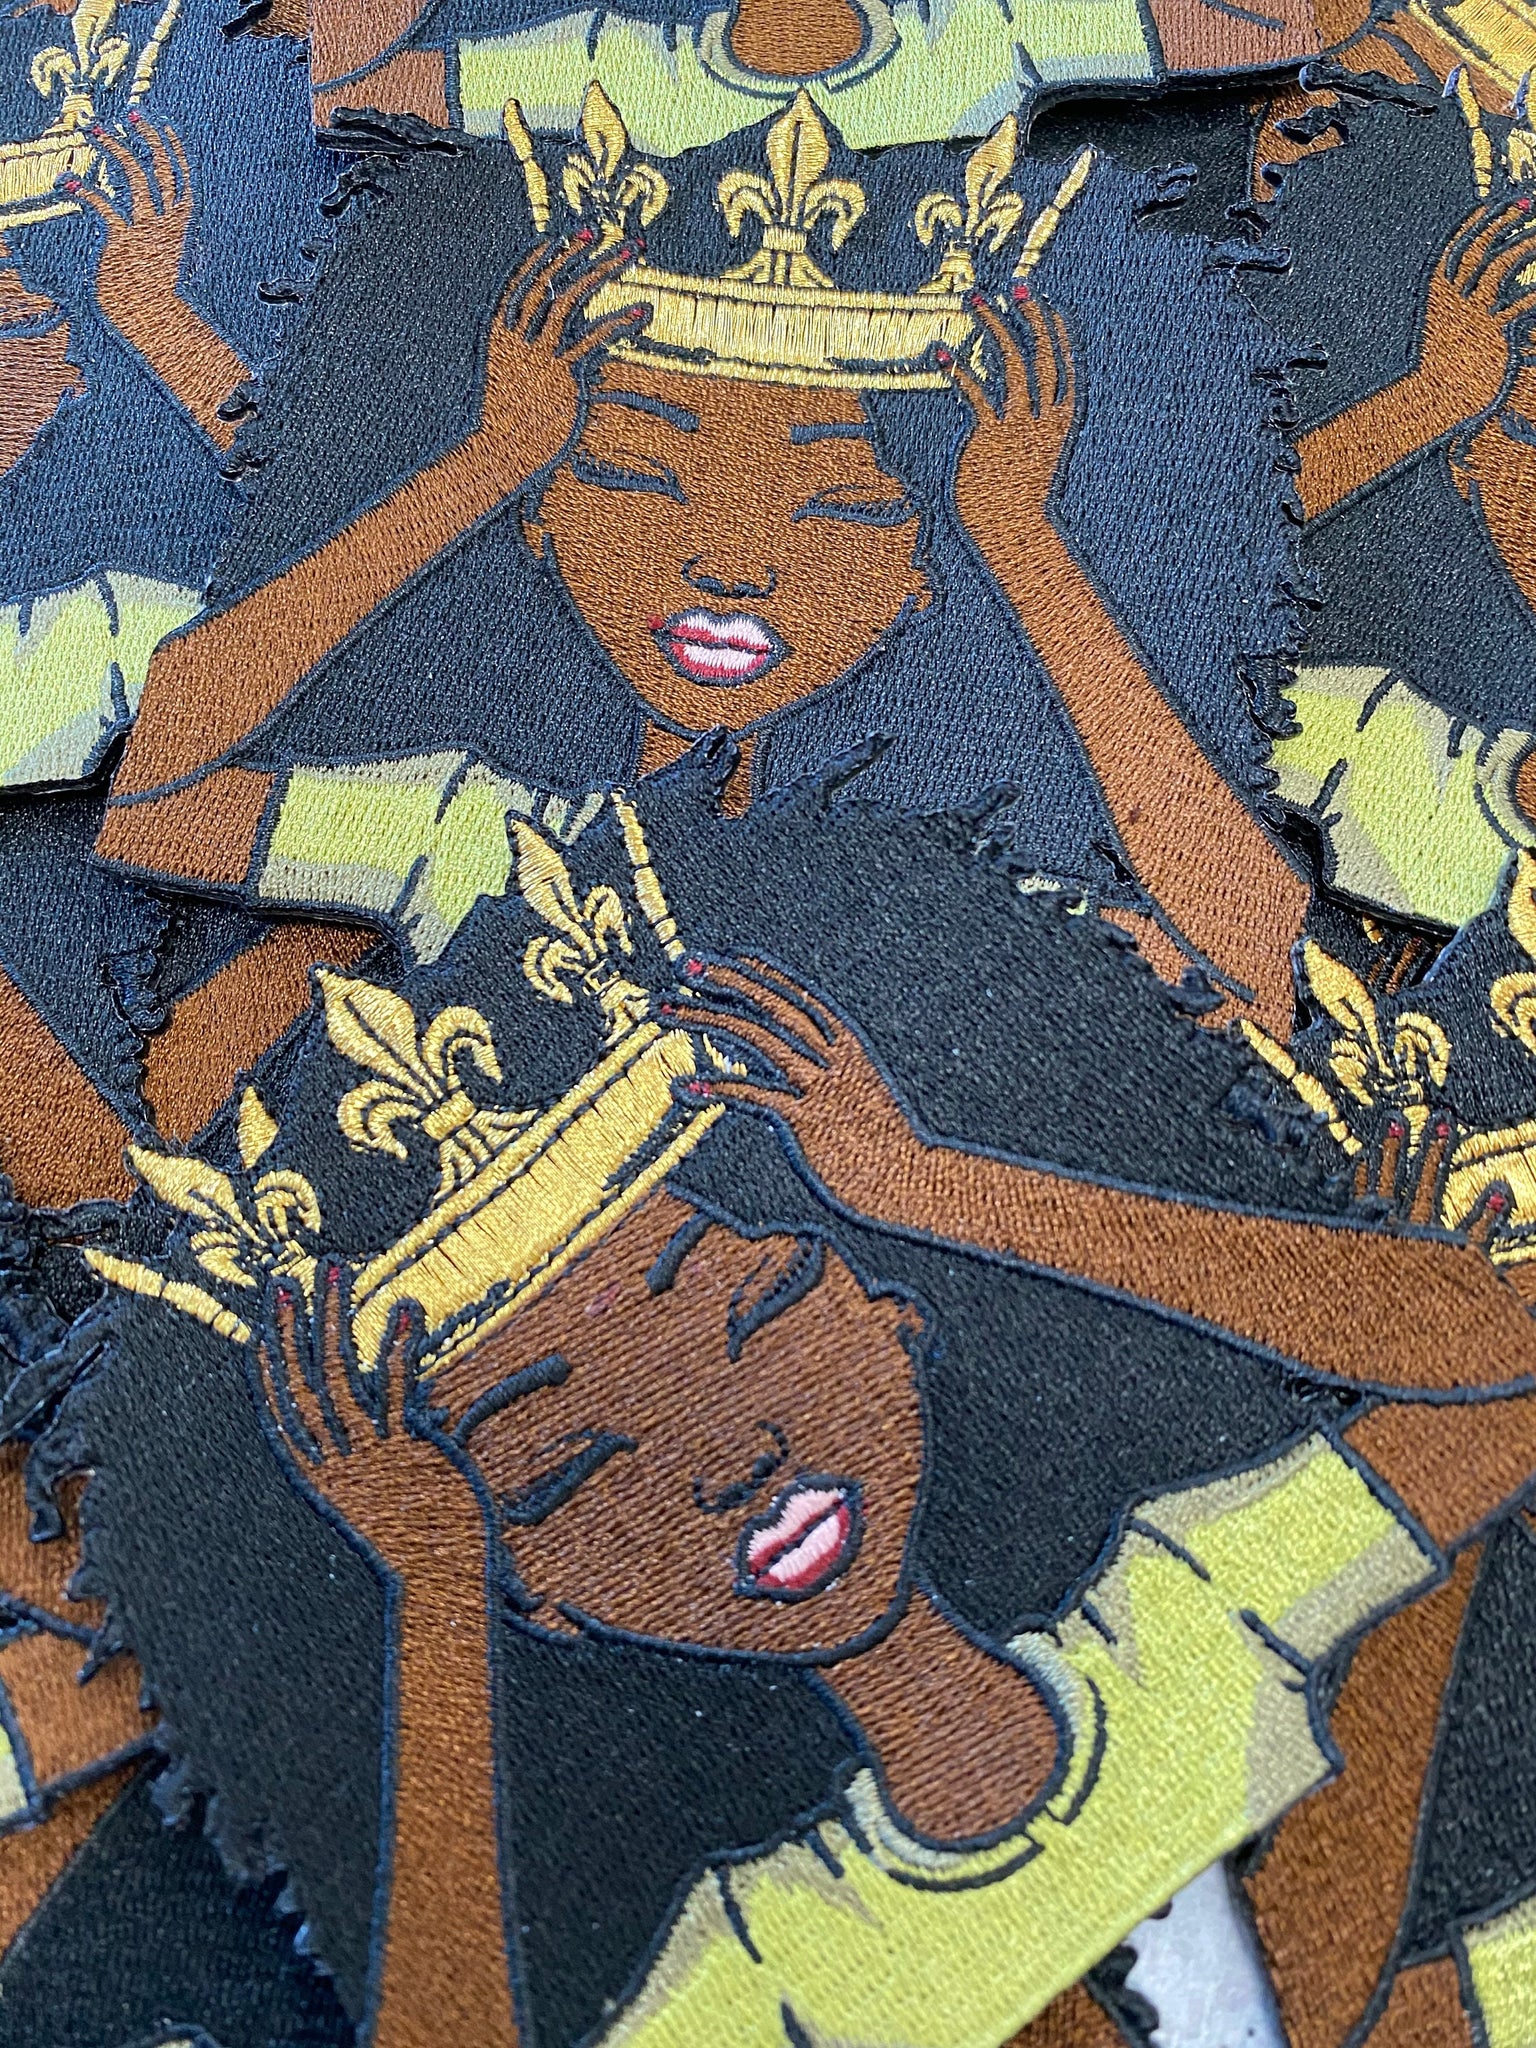 New, "Adjust Yo' Crown Sis" Small 4'' Patch, Iron-on/Sew-on, Exclusive Applique, Uplifting, Diva Patch, 100% Embroidered DIYPatch